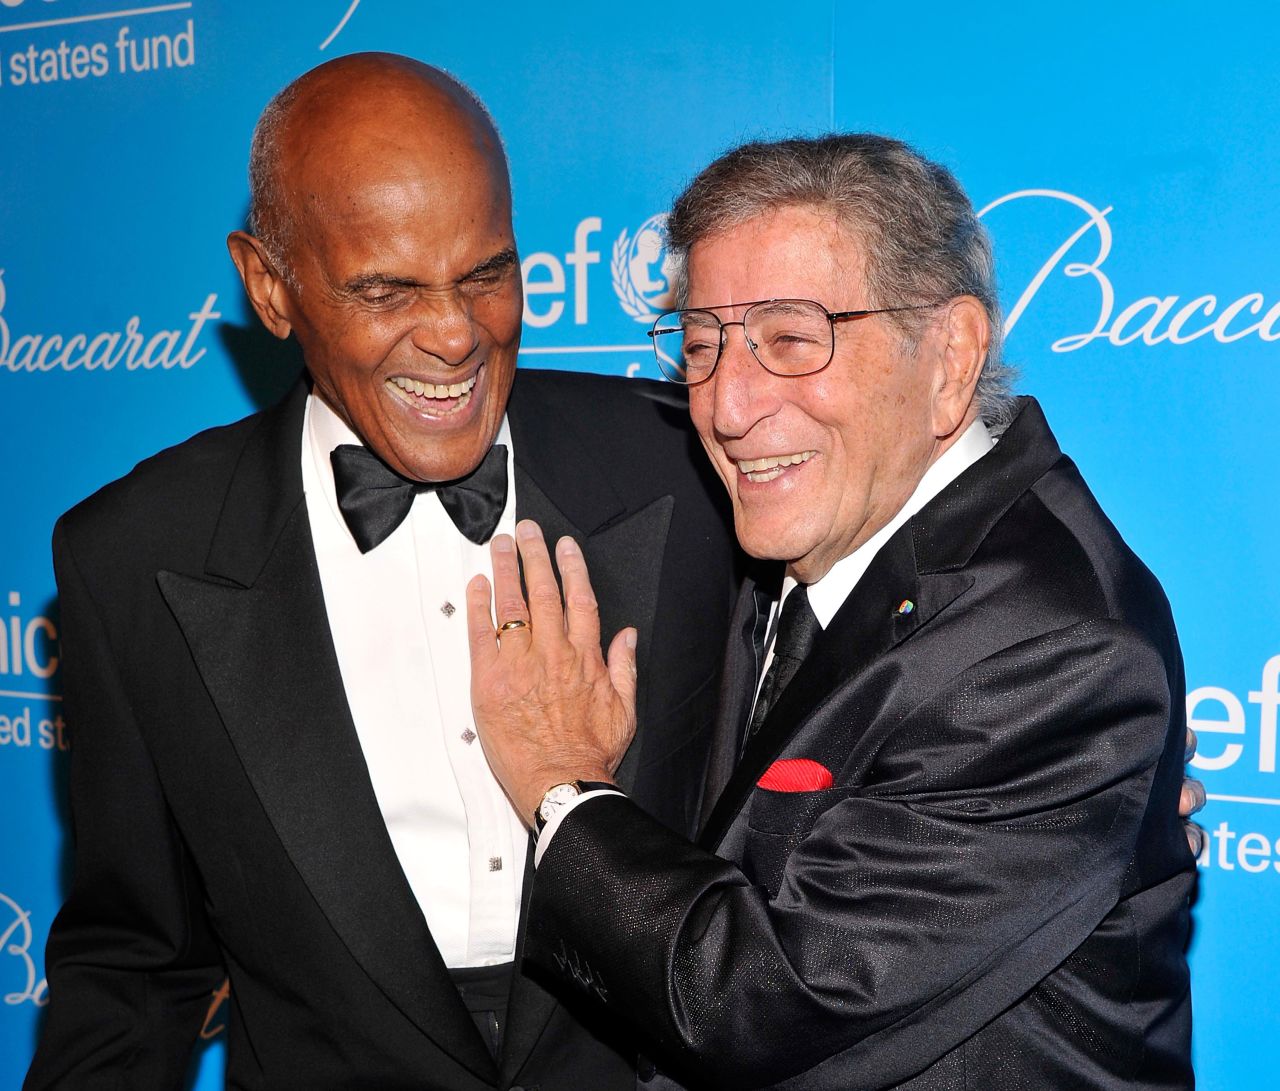 Belafonte and singer Tony Bennett attend a UNICEF benefit in New York in 2012.